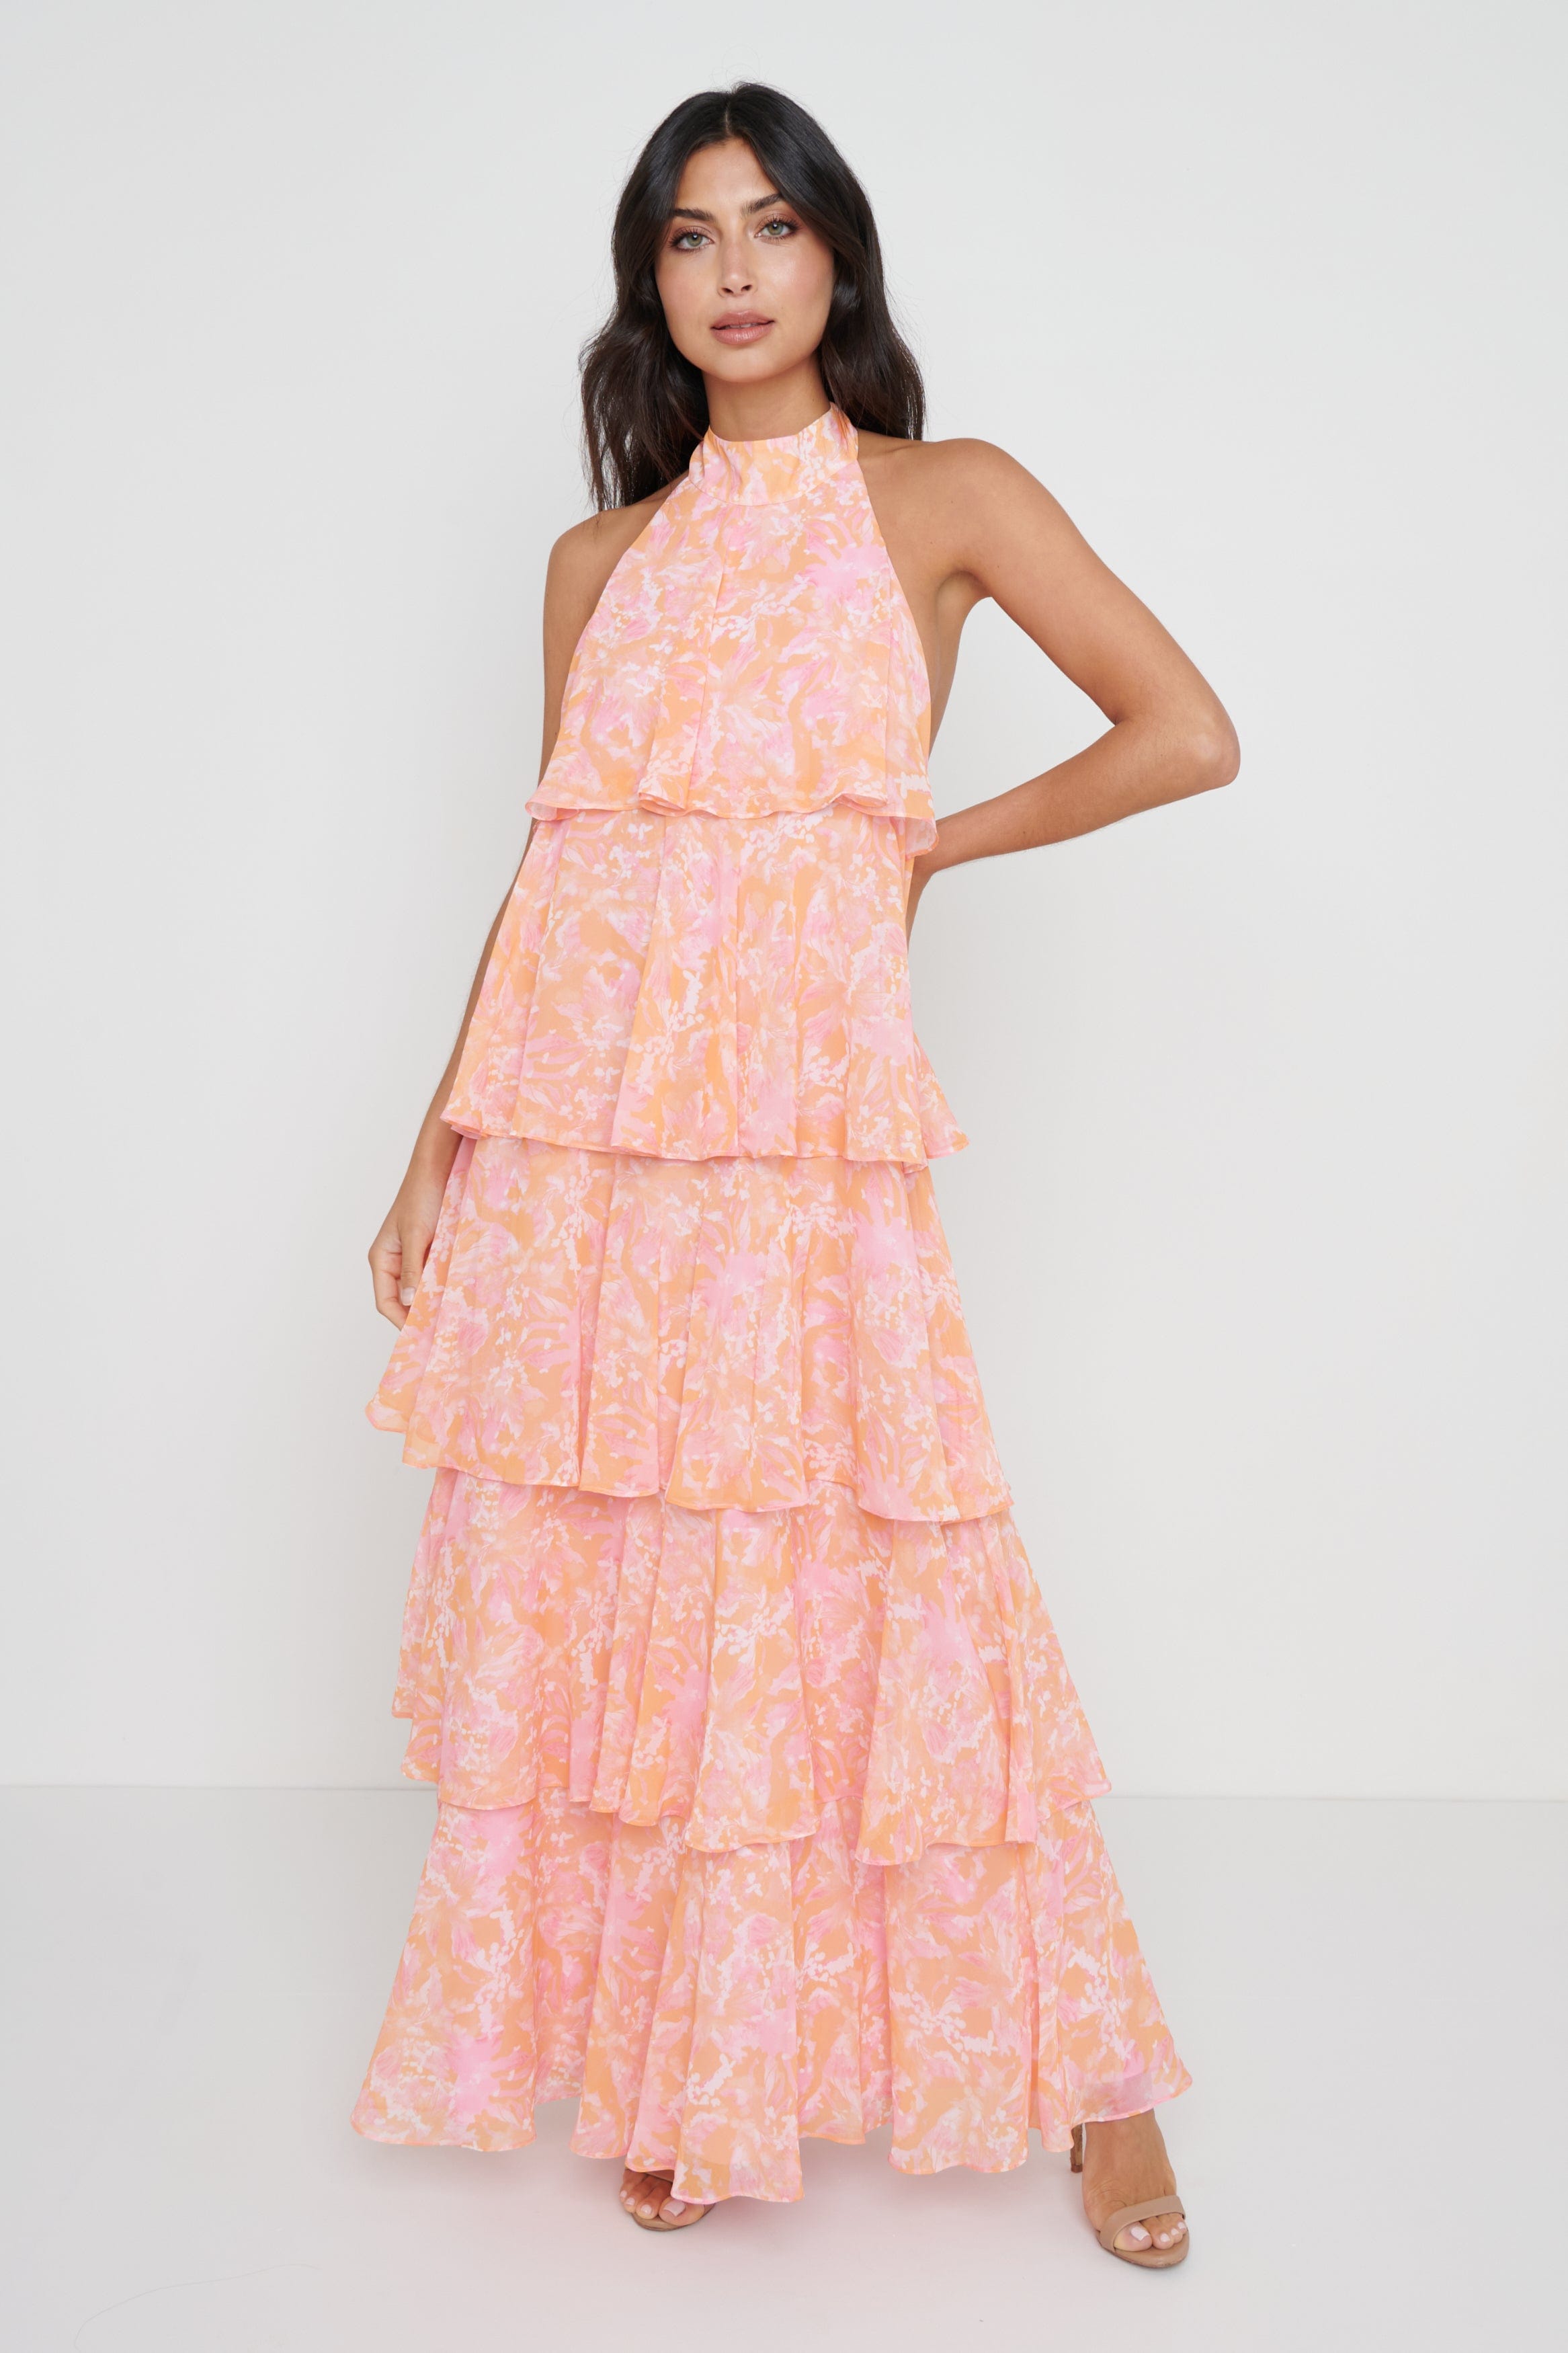 Thea Halter Neck Ruffle Dress - Pink and Orange Floral, 14